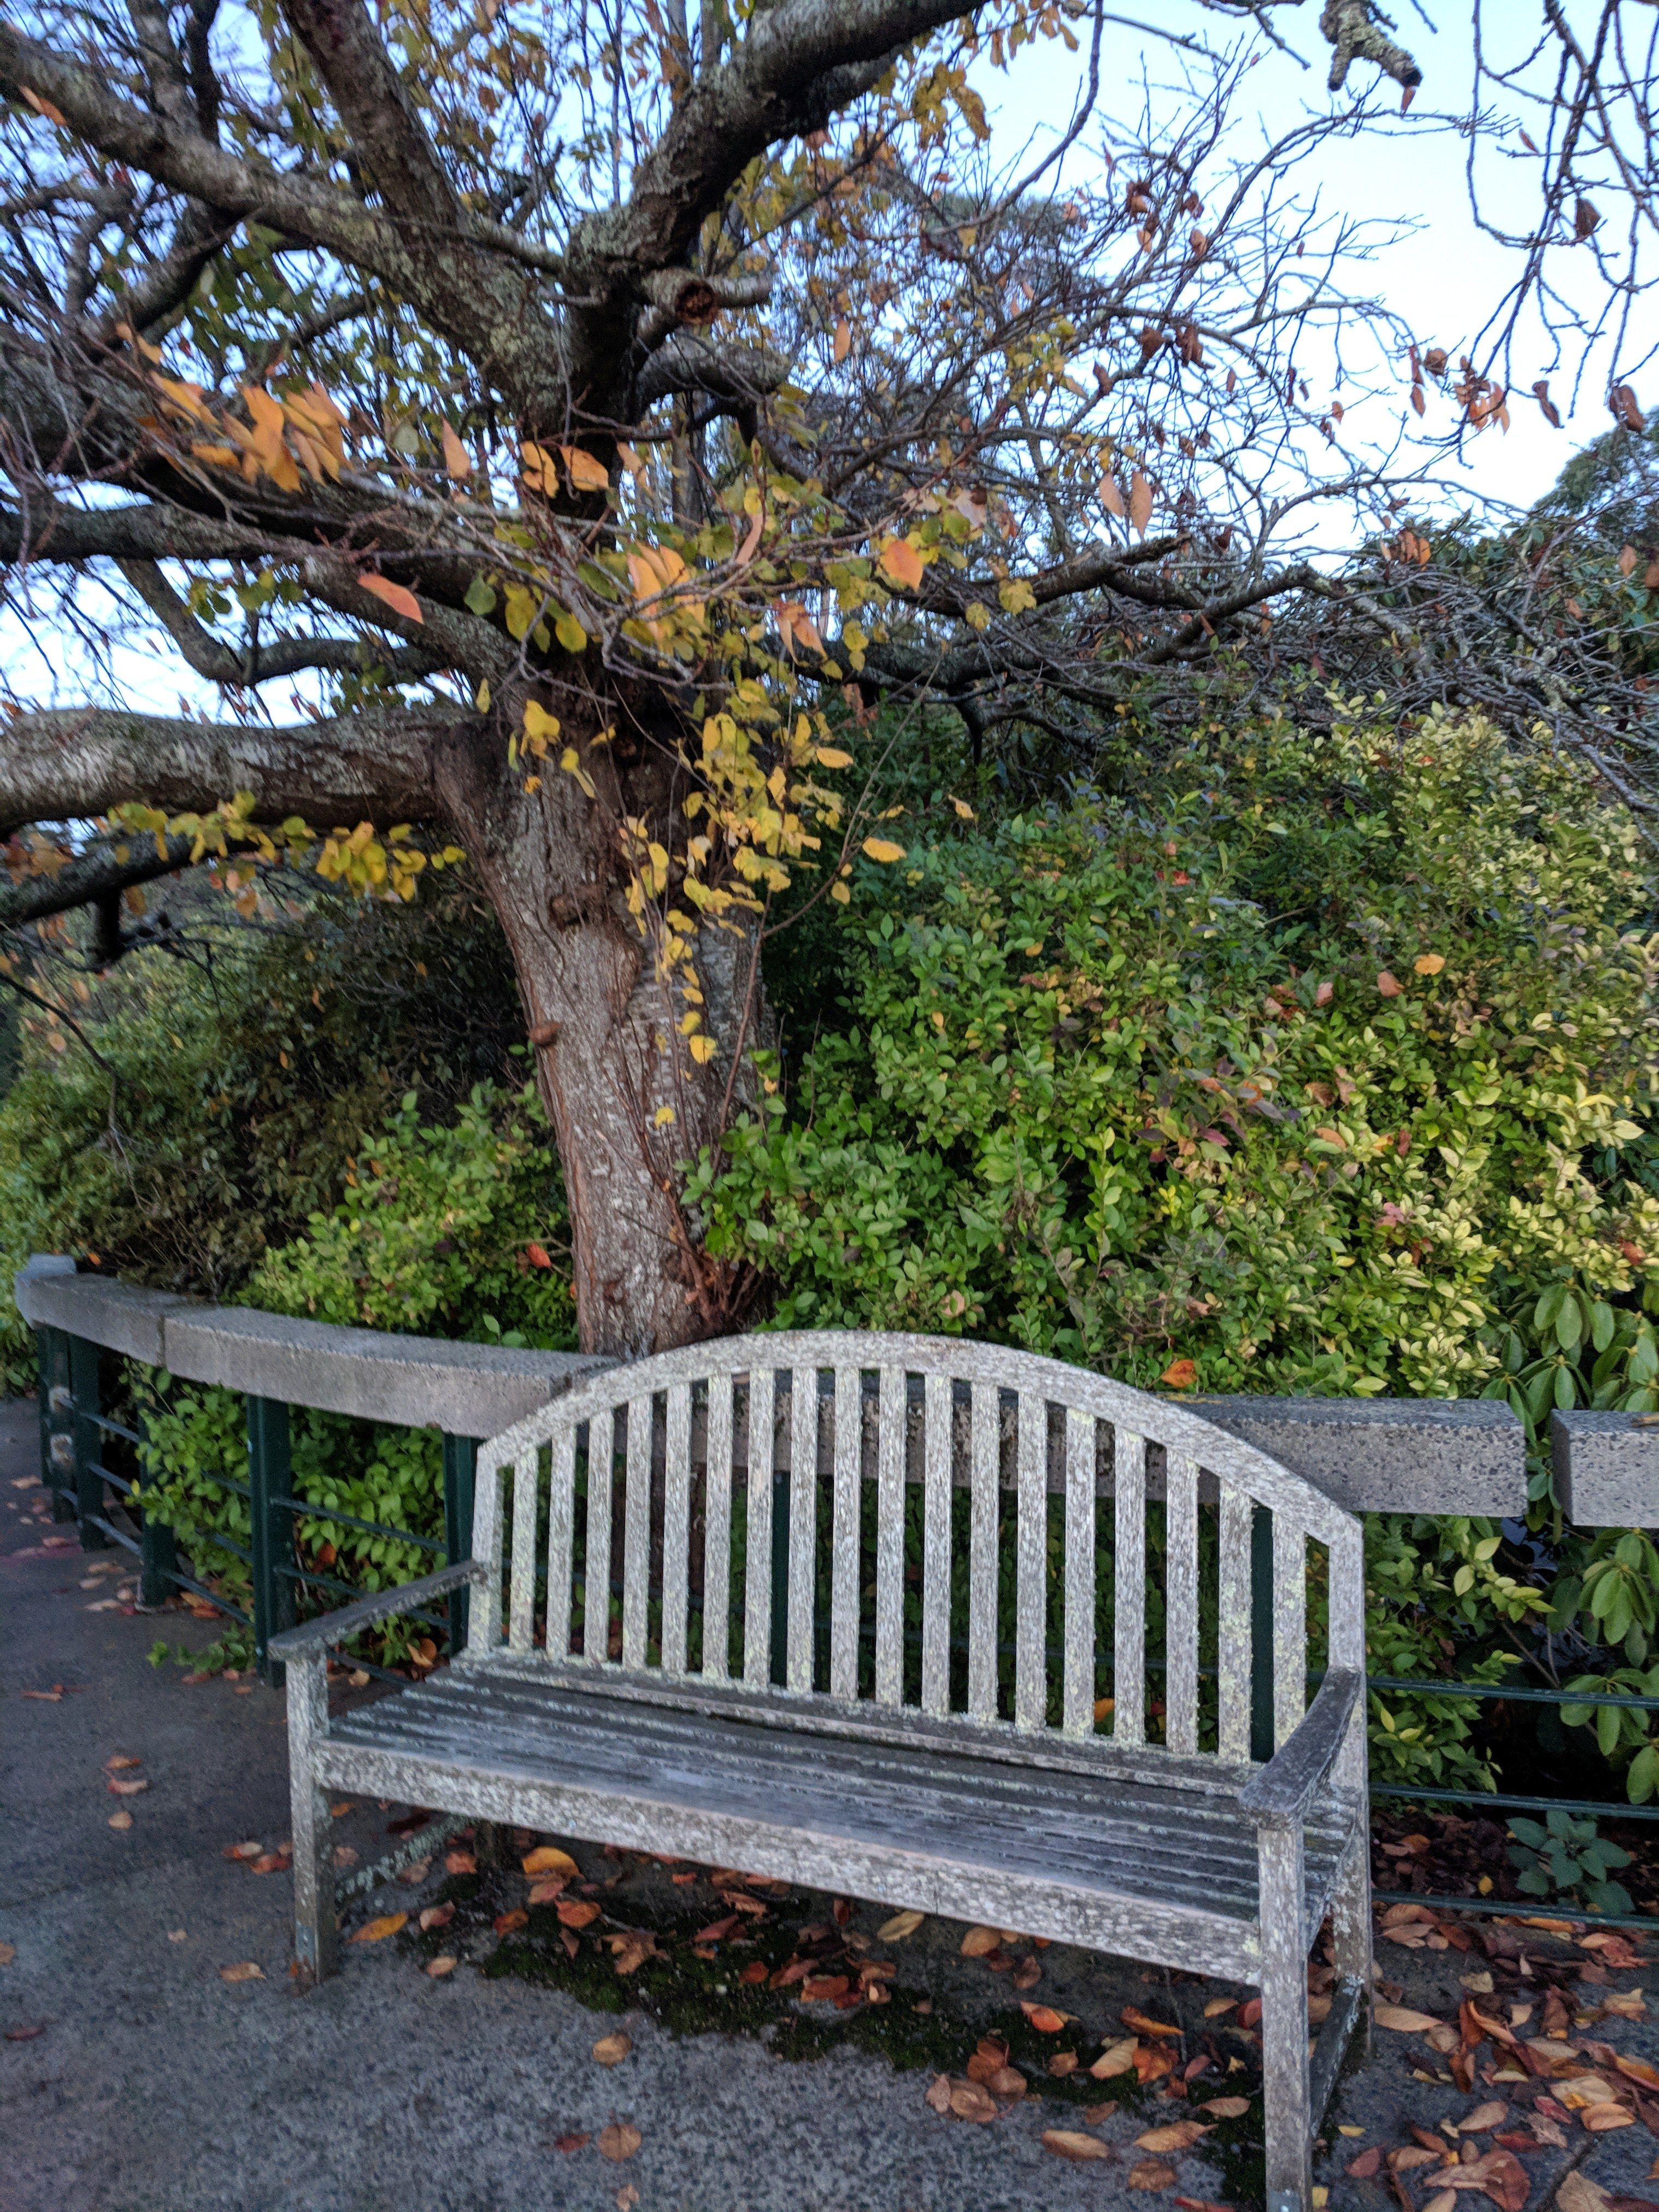 Caption: A bench for resting